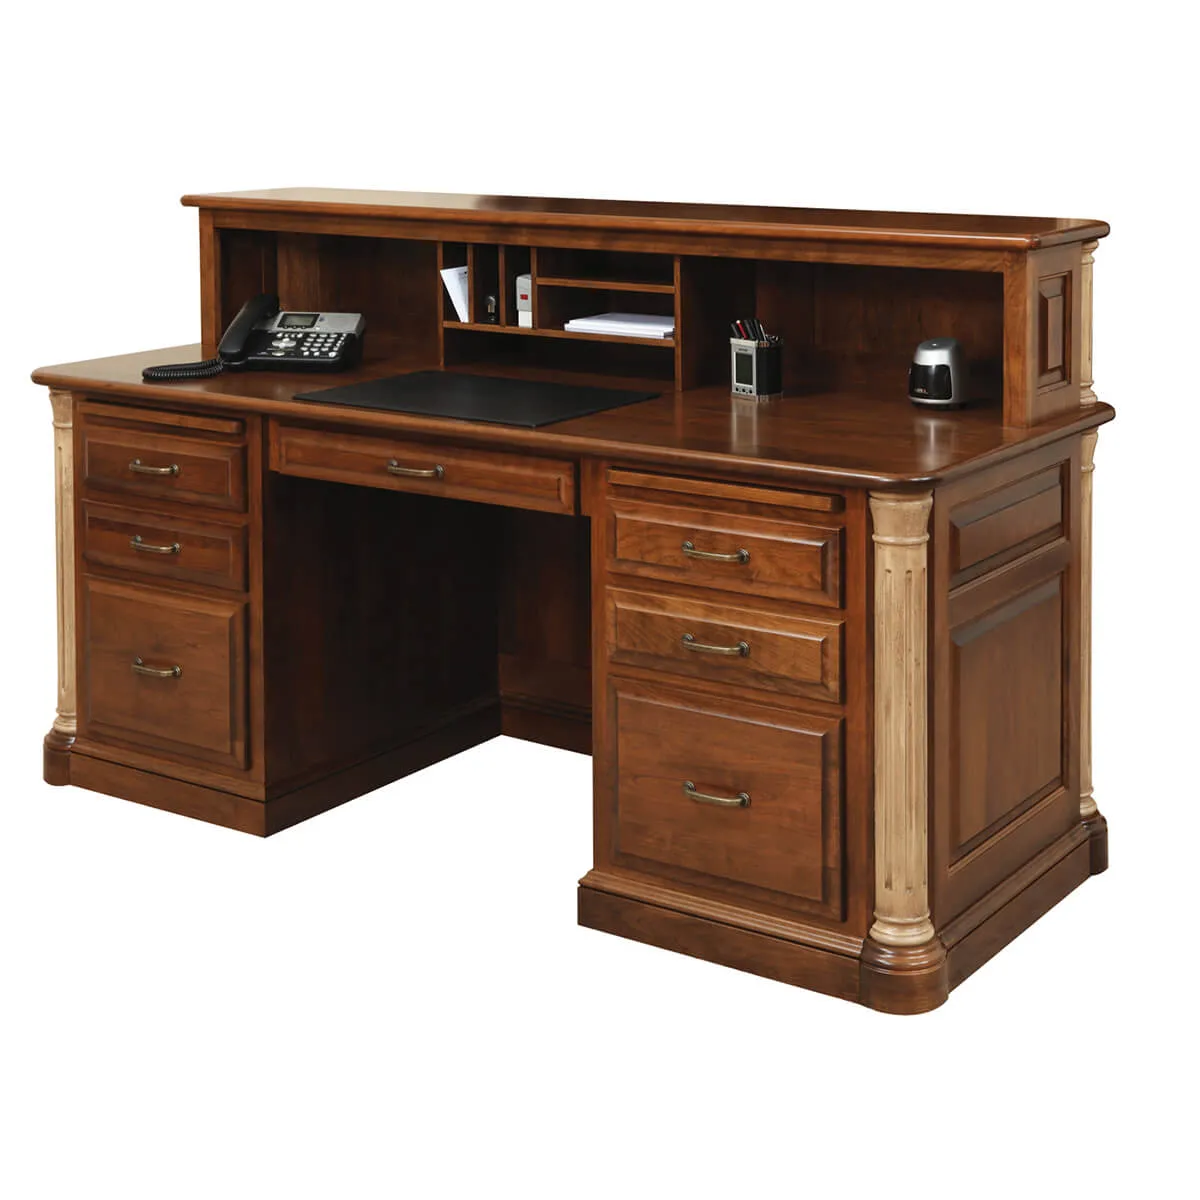 Jefferson Series Executive Desk with Cubby